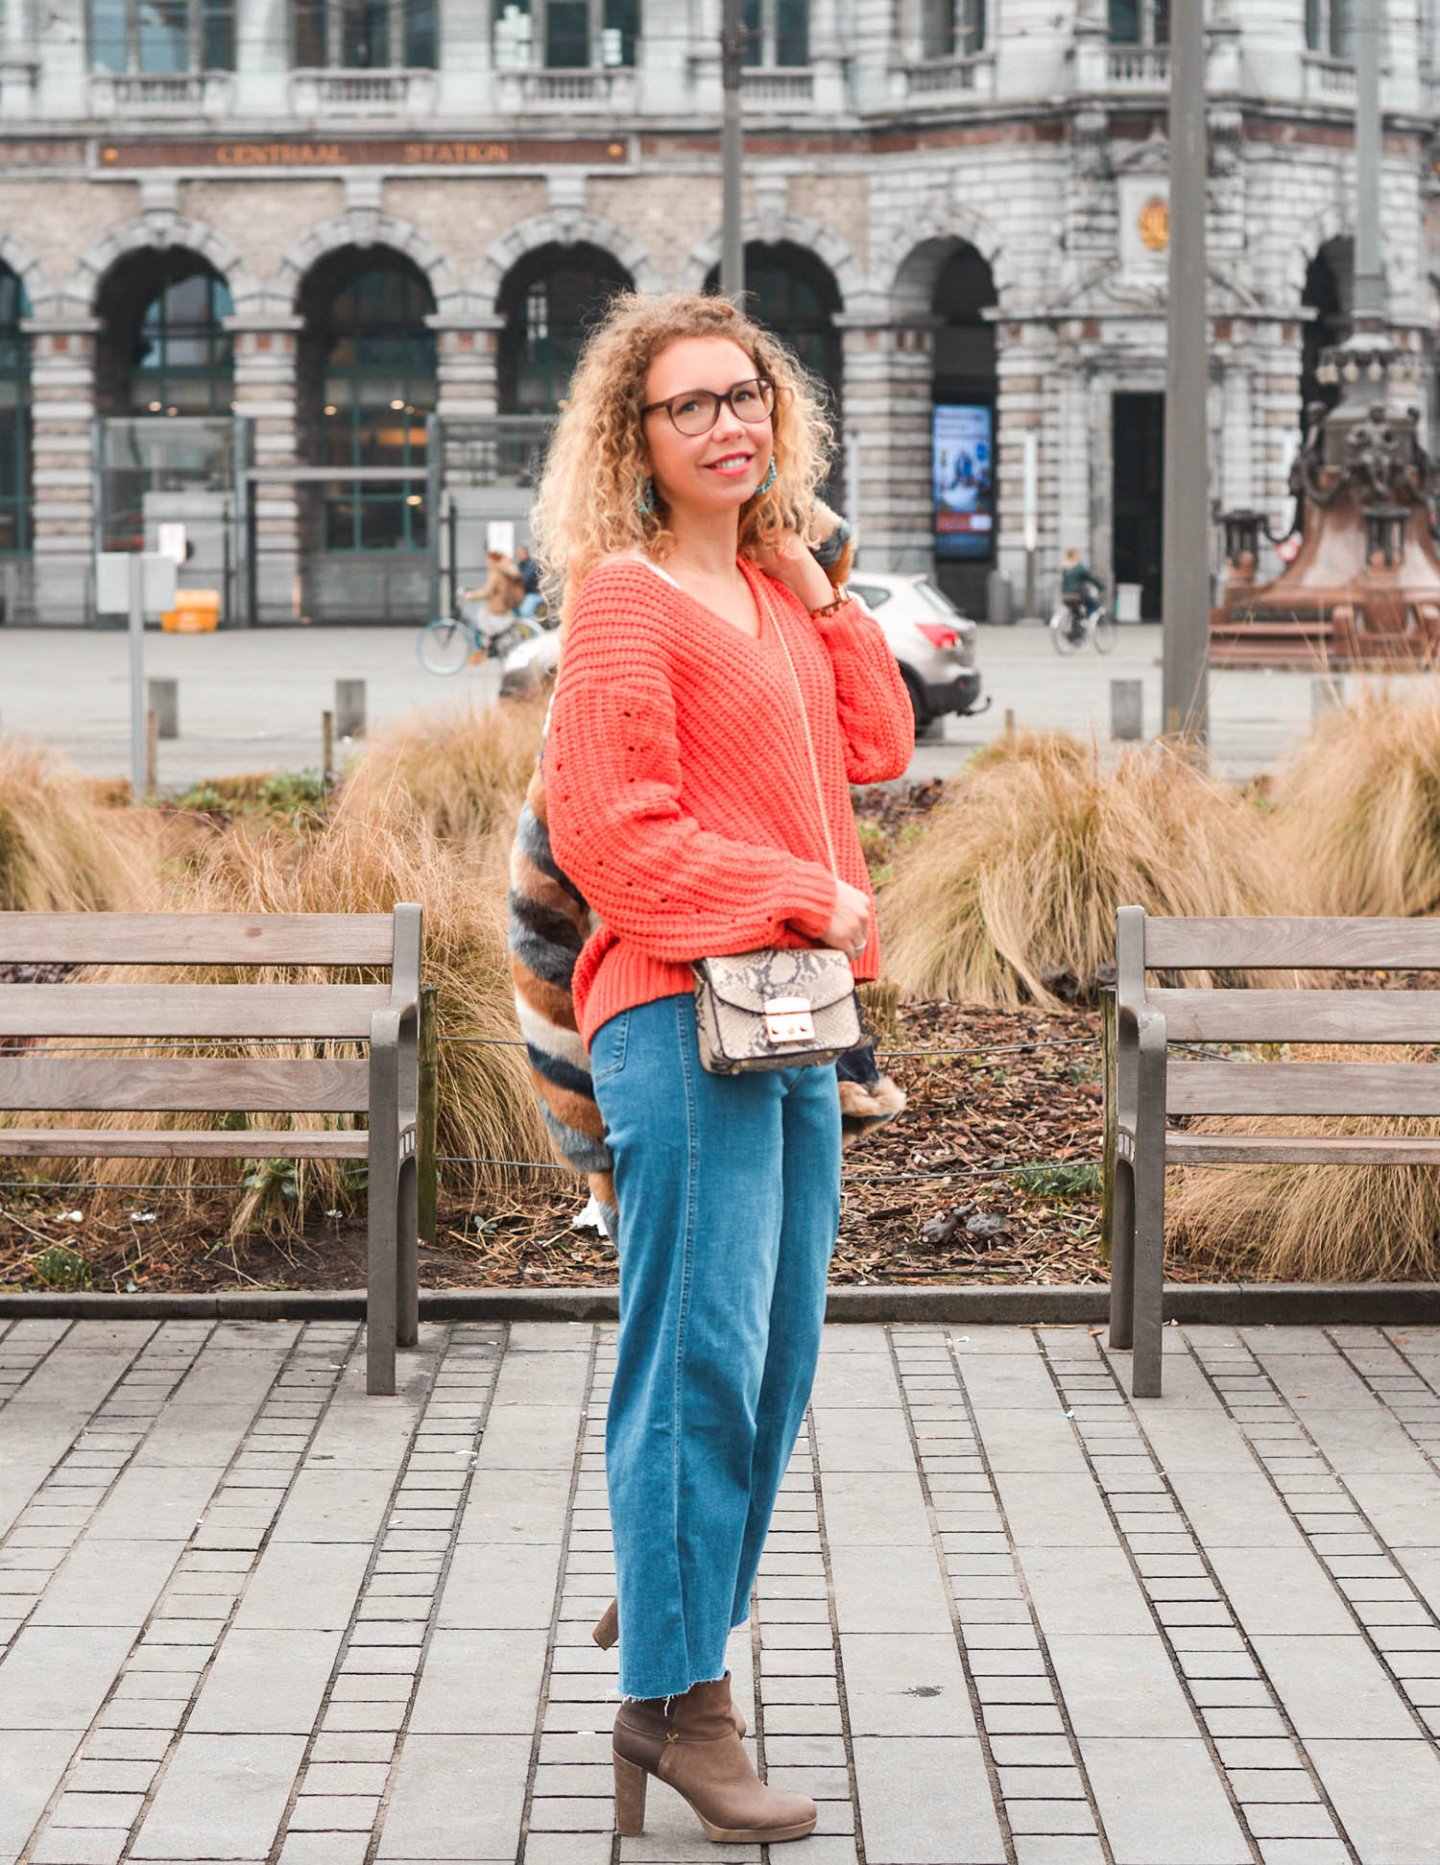 denim-culottes-kunstfellmantel-seventies-style-kationette-outfit